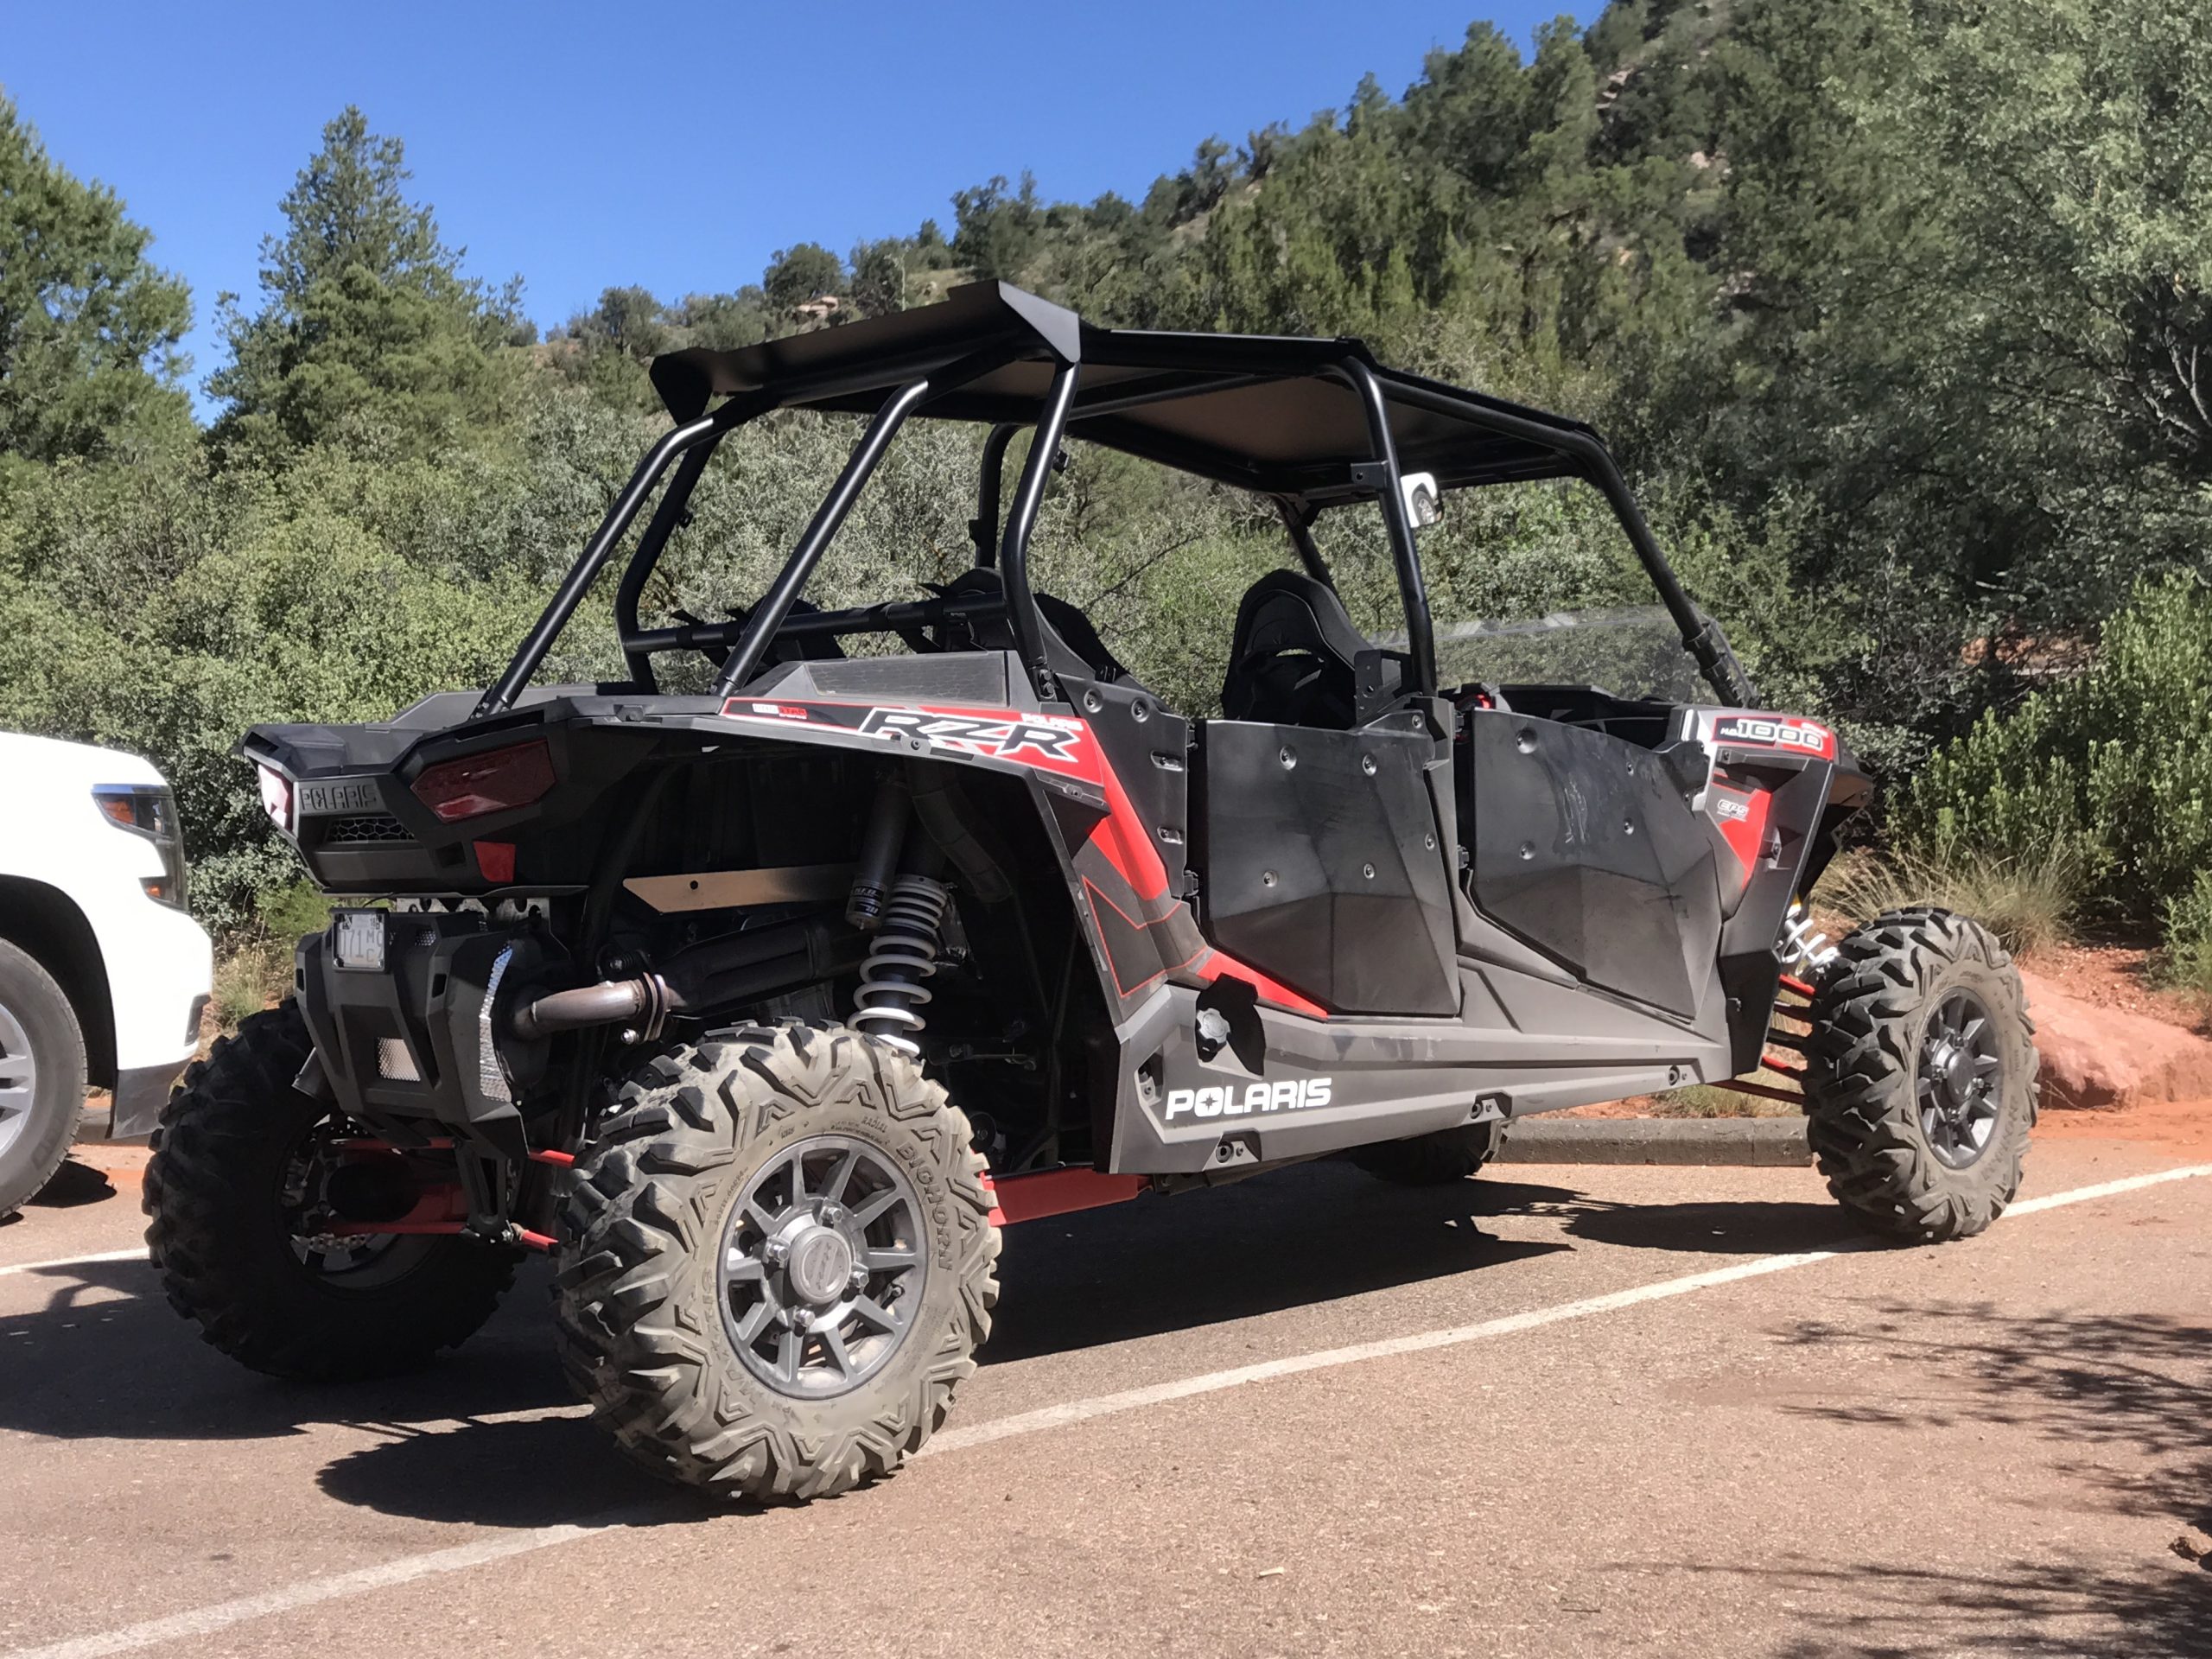 New Mexico Woman Files Lawsuit Against Polaris Alleging Defective Vehicle Led to Amputation